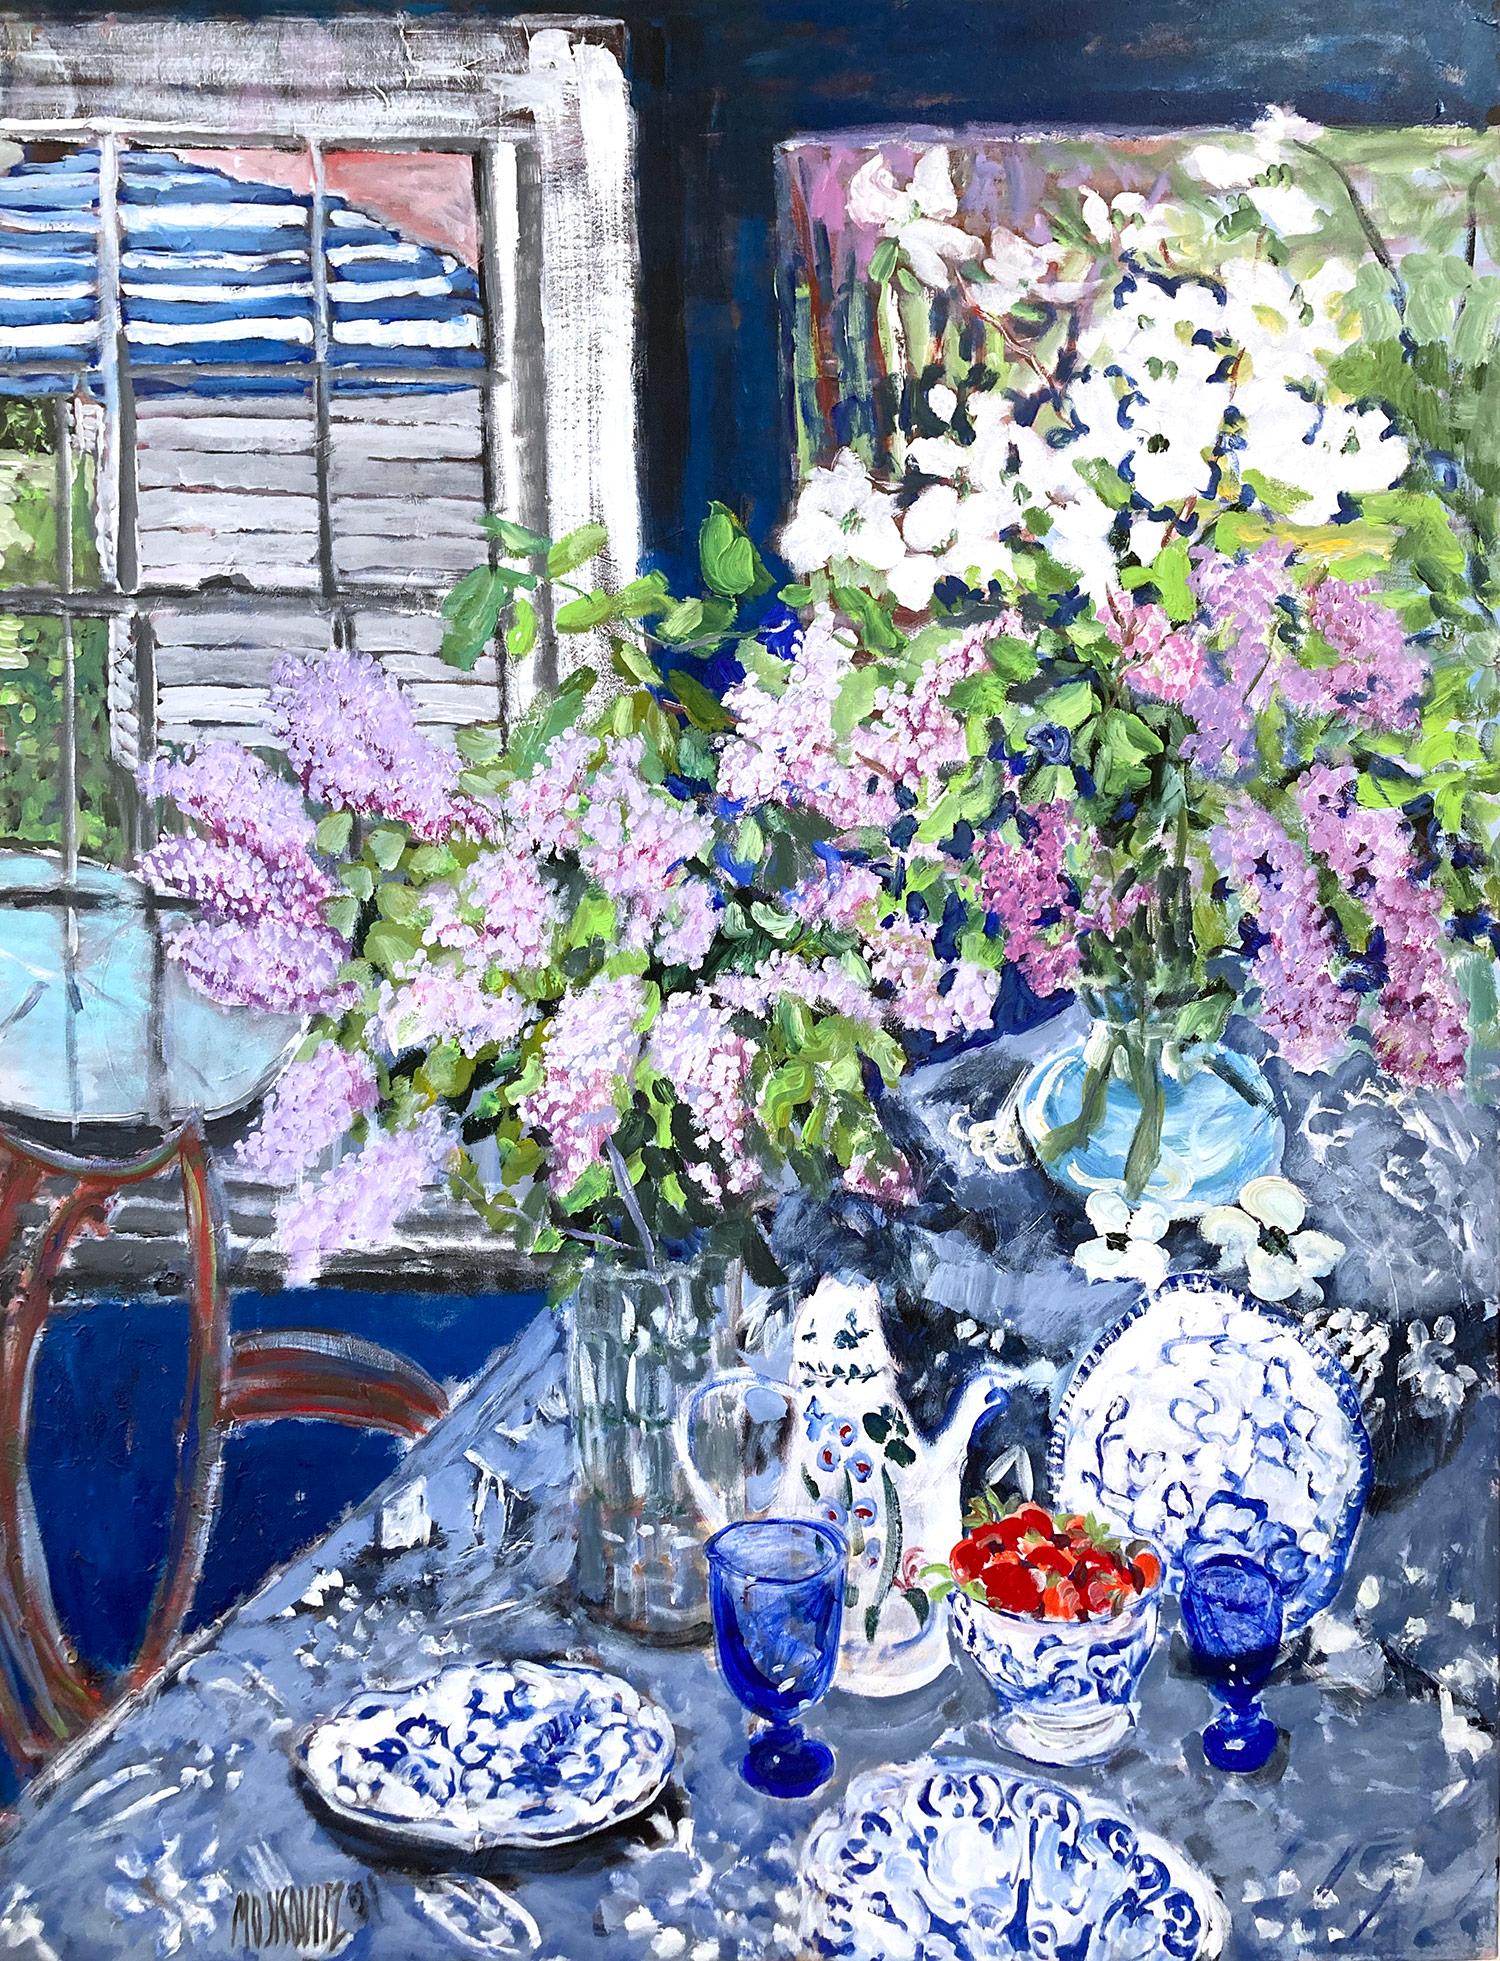  David Moskovitz Landscape Painting - "Table Set for the Afternoon" American 20th Century Still Life Canvas Painting